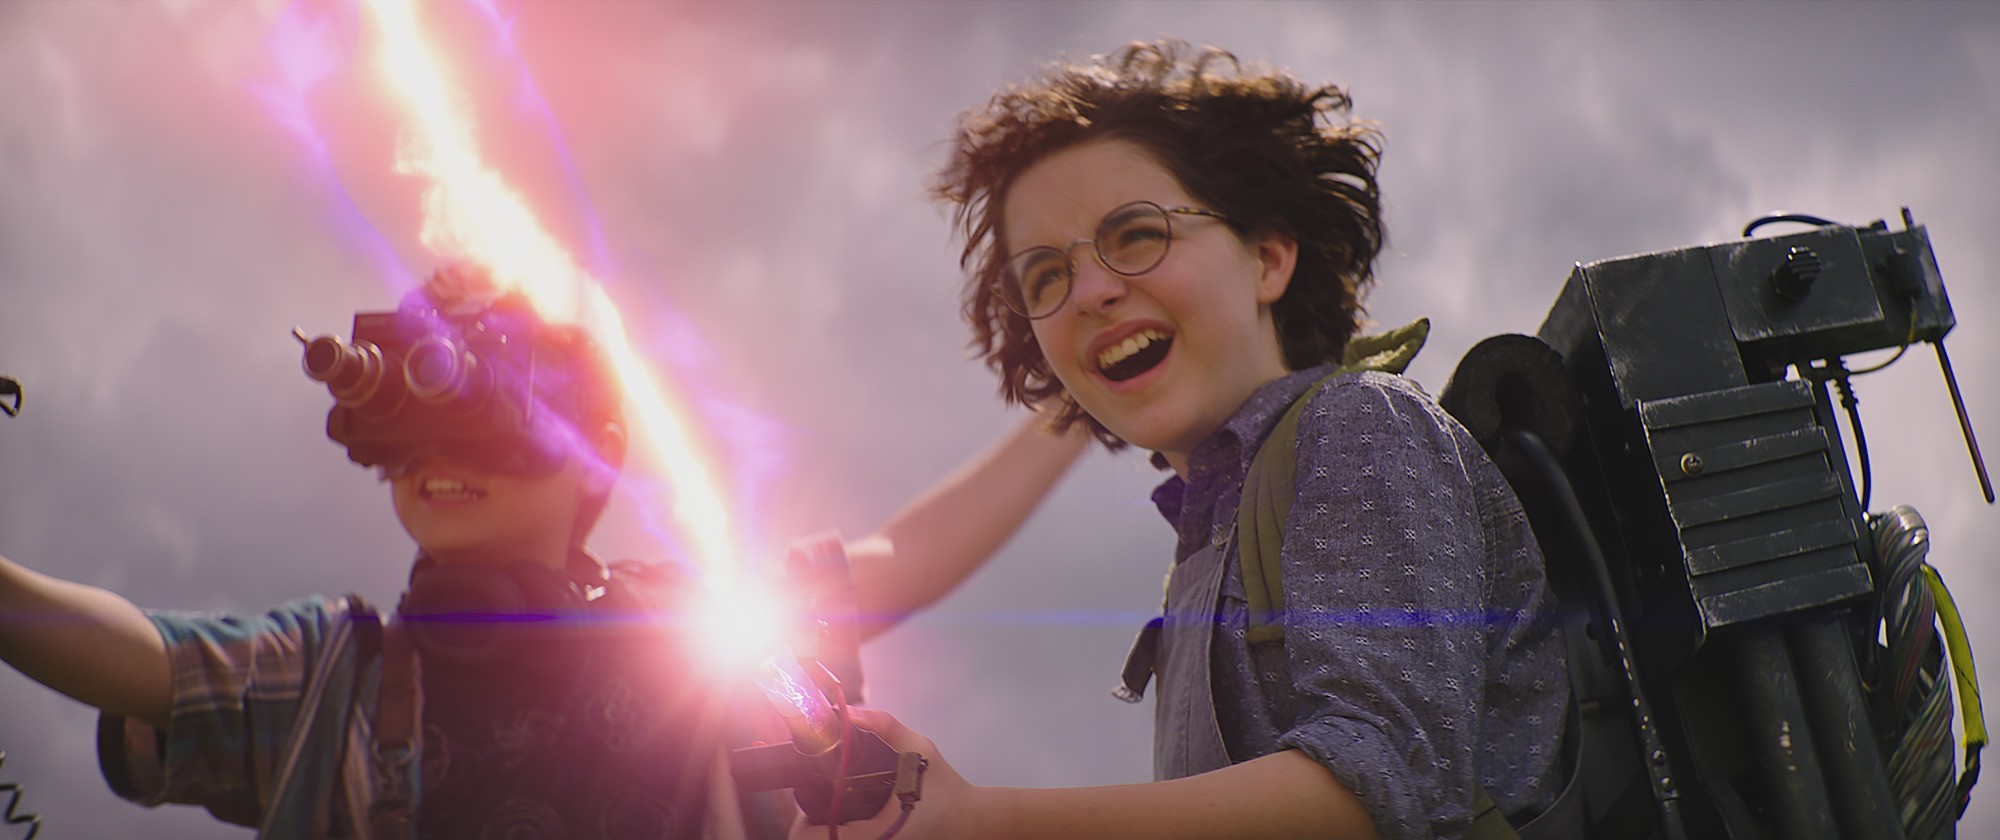 Phoebe (Mckenna Grace) and Podcast (Logan Kim, left) fire a proton pack for the first time in Columbia Pictures' GHOSTBUSTERS: AFTERLIFE. (Foto: Divulgação)